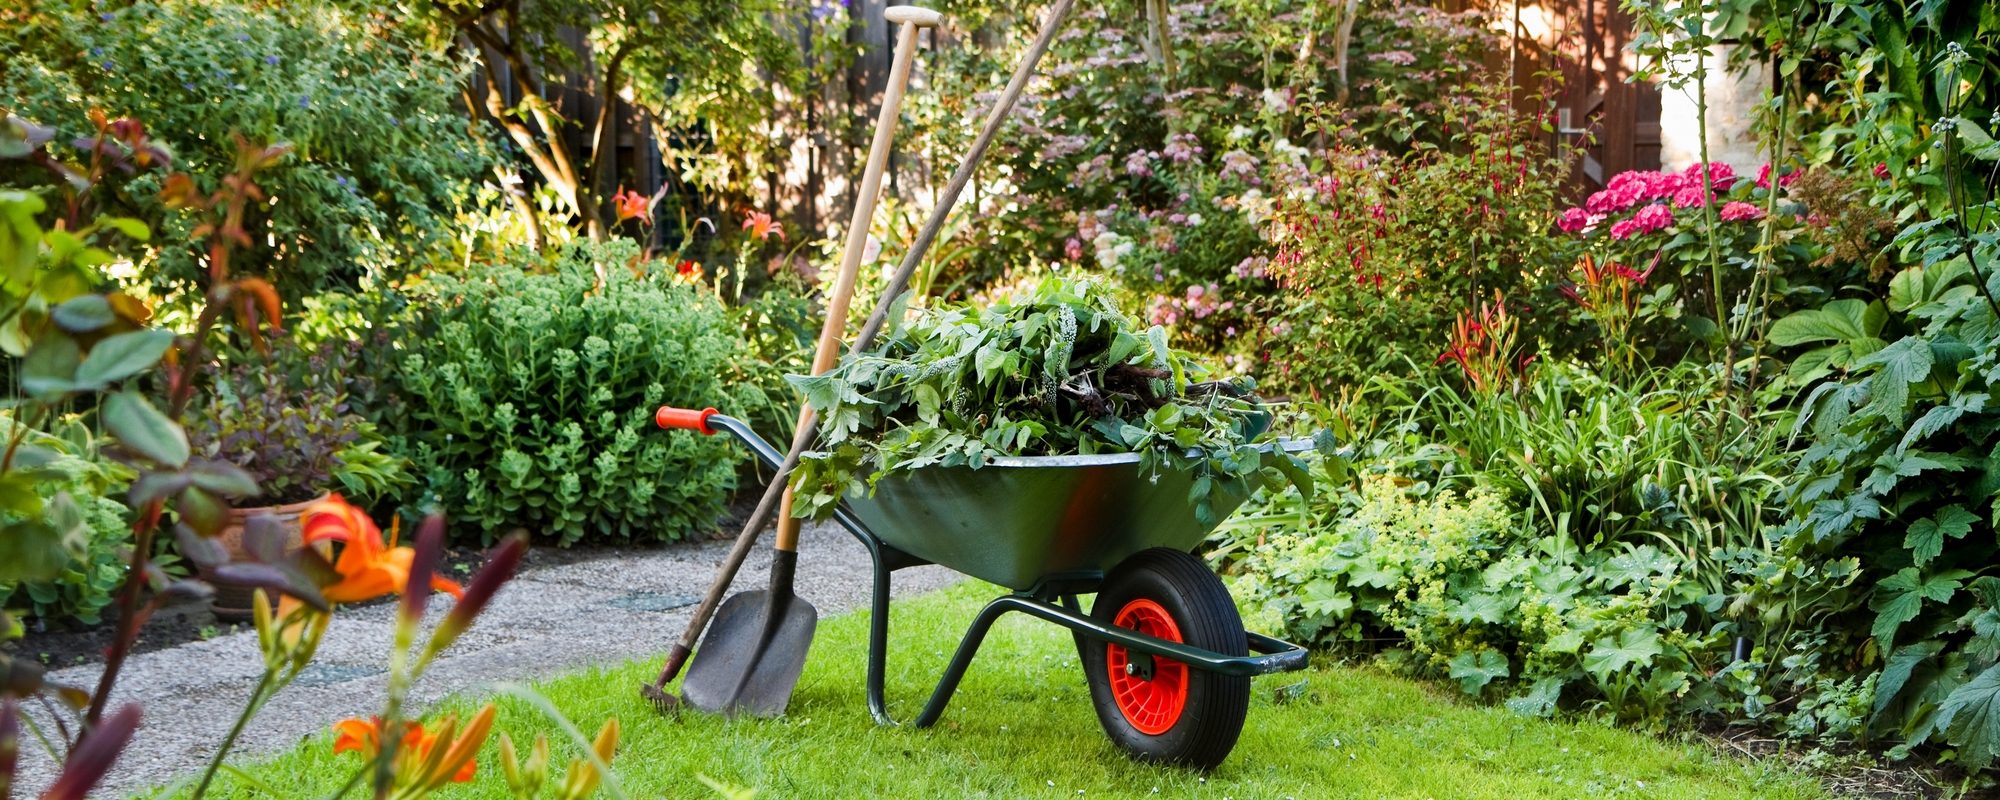 Find A Local Gardener Compare, How To Find A Good Local Gardener